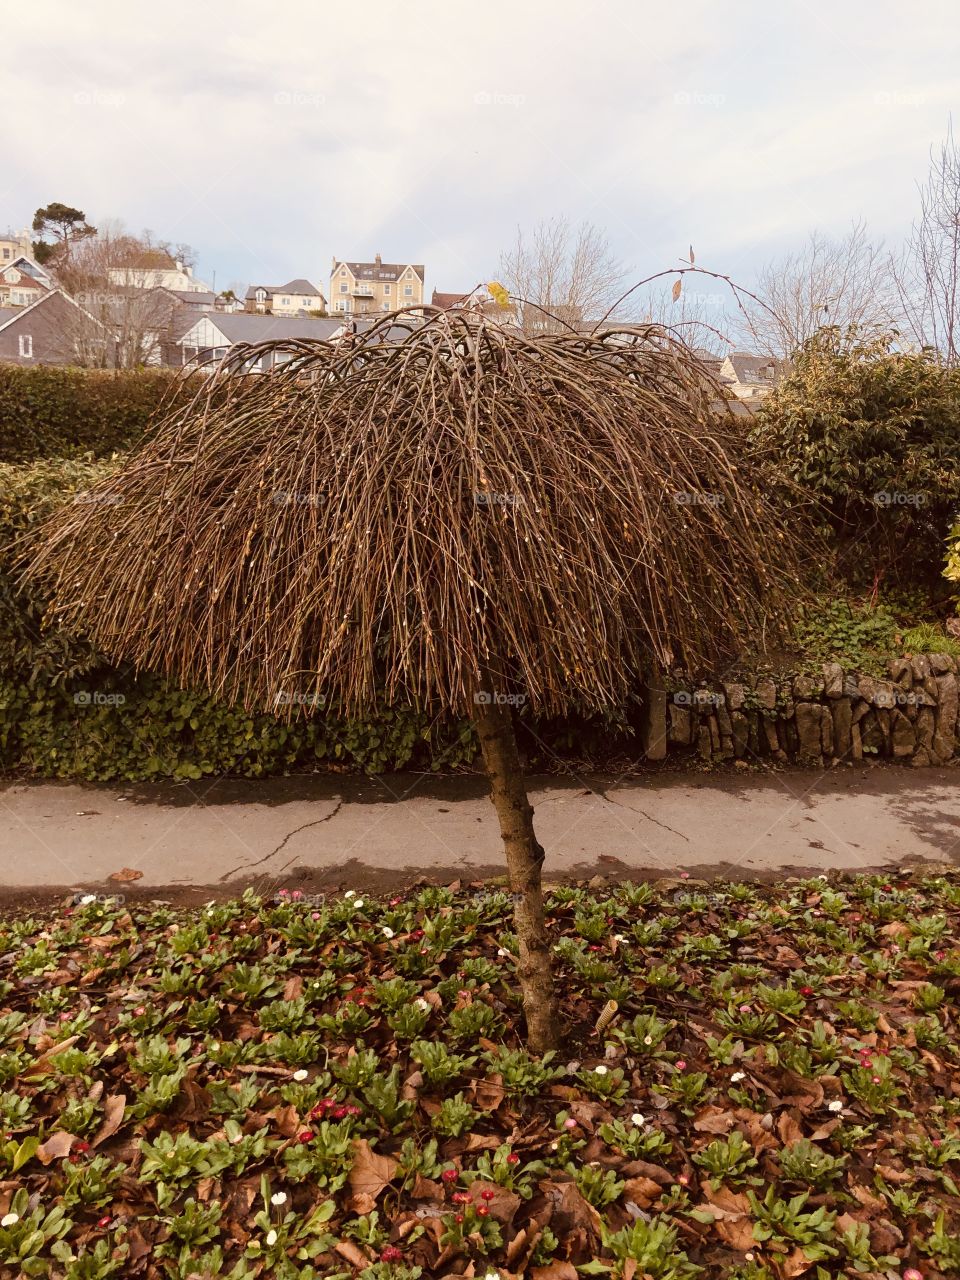 A most unusual shaped tree, perhaps it’s shaped like a mop, nine the less it has an attractive presence.